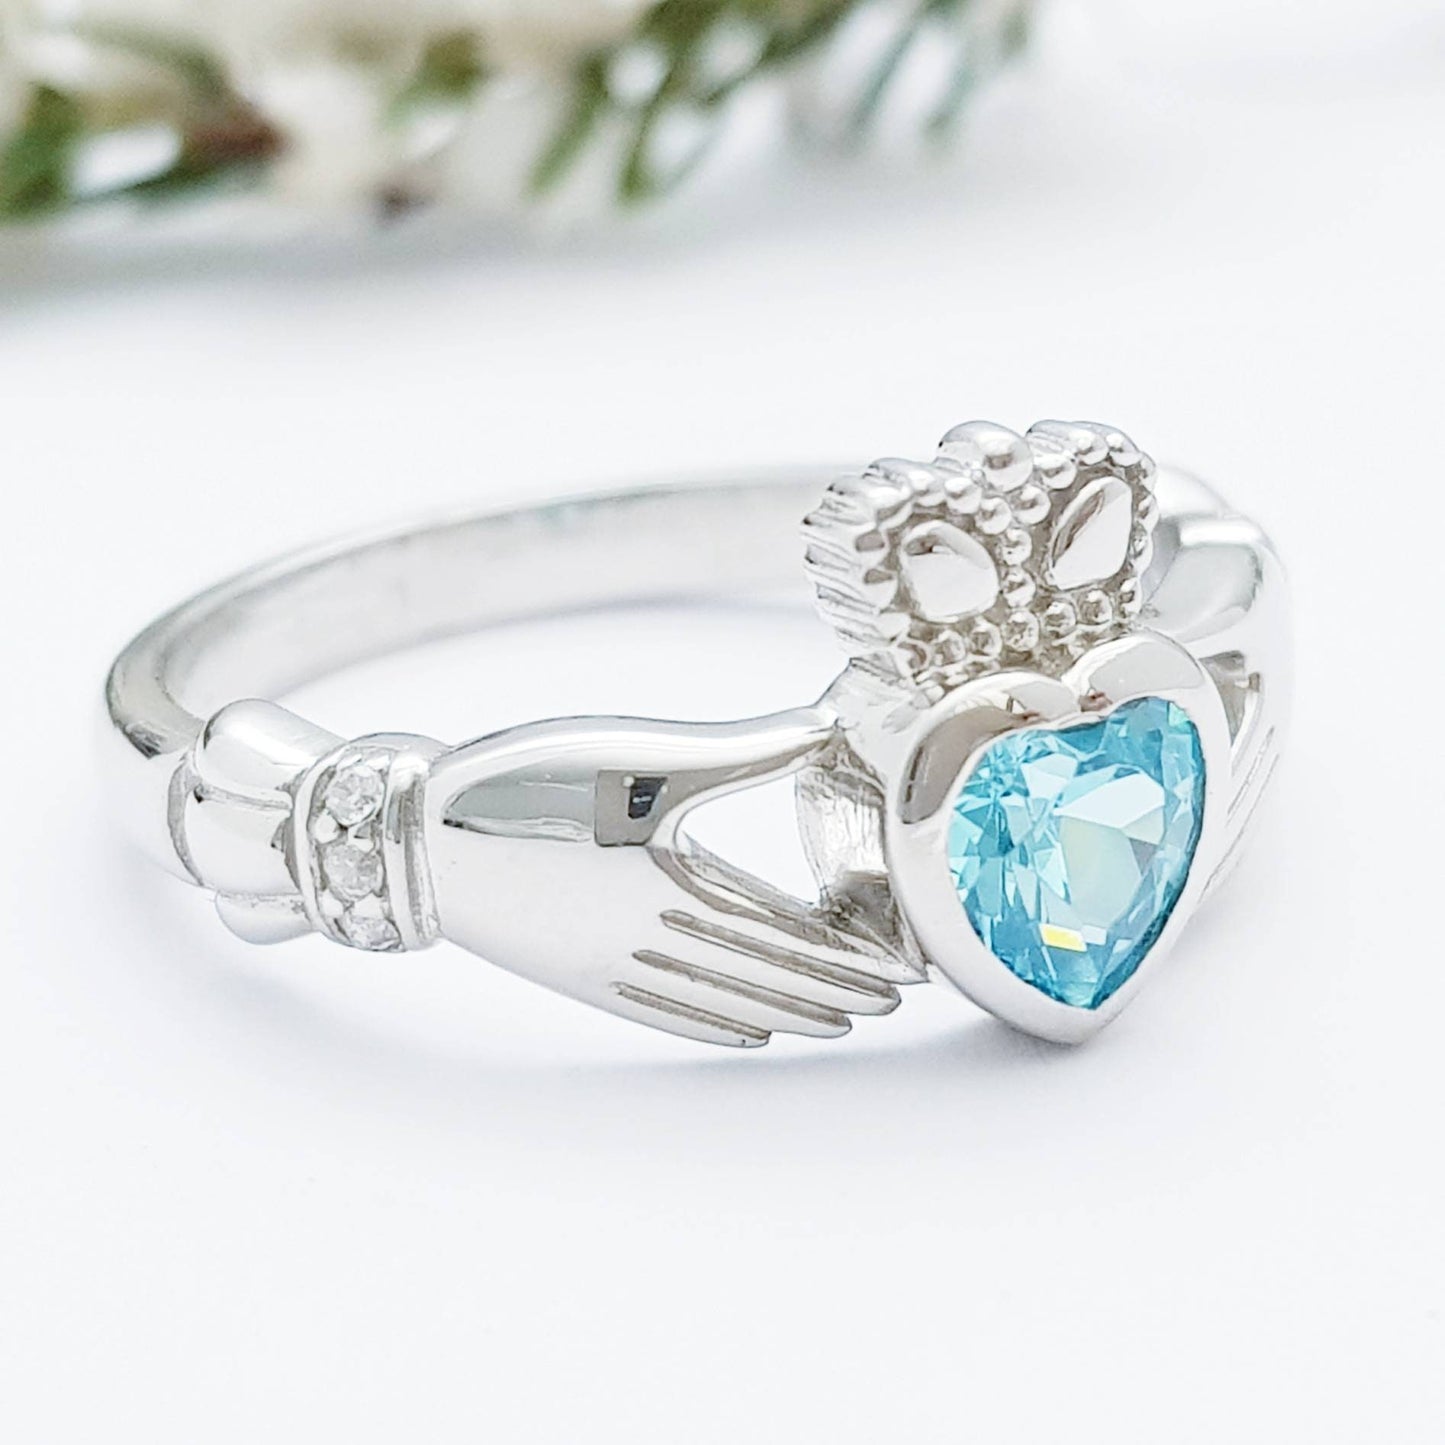 Sterling Silver Claddagh ring set with turquoise heart shaped stone